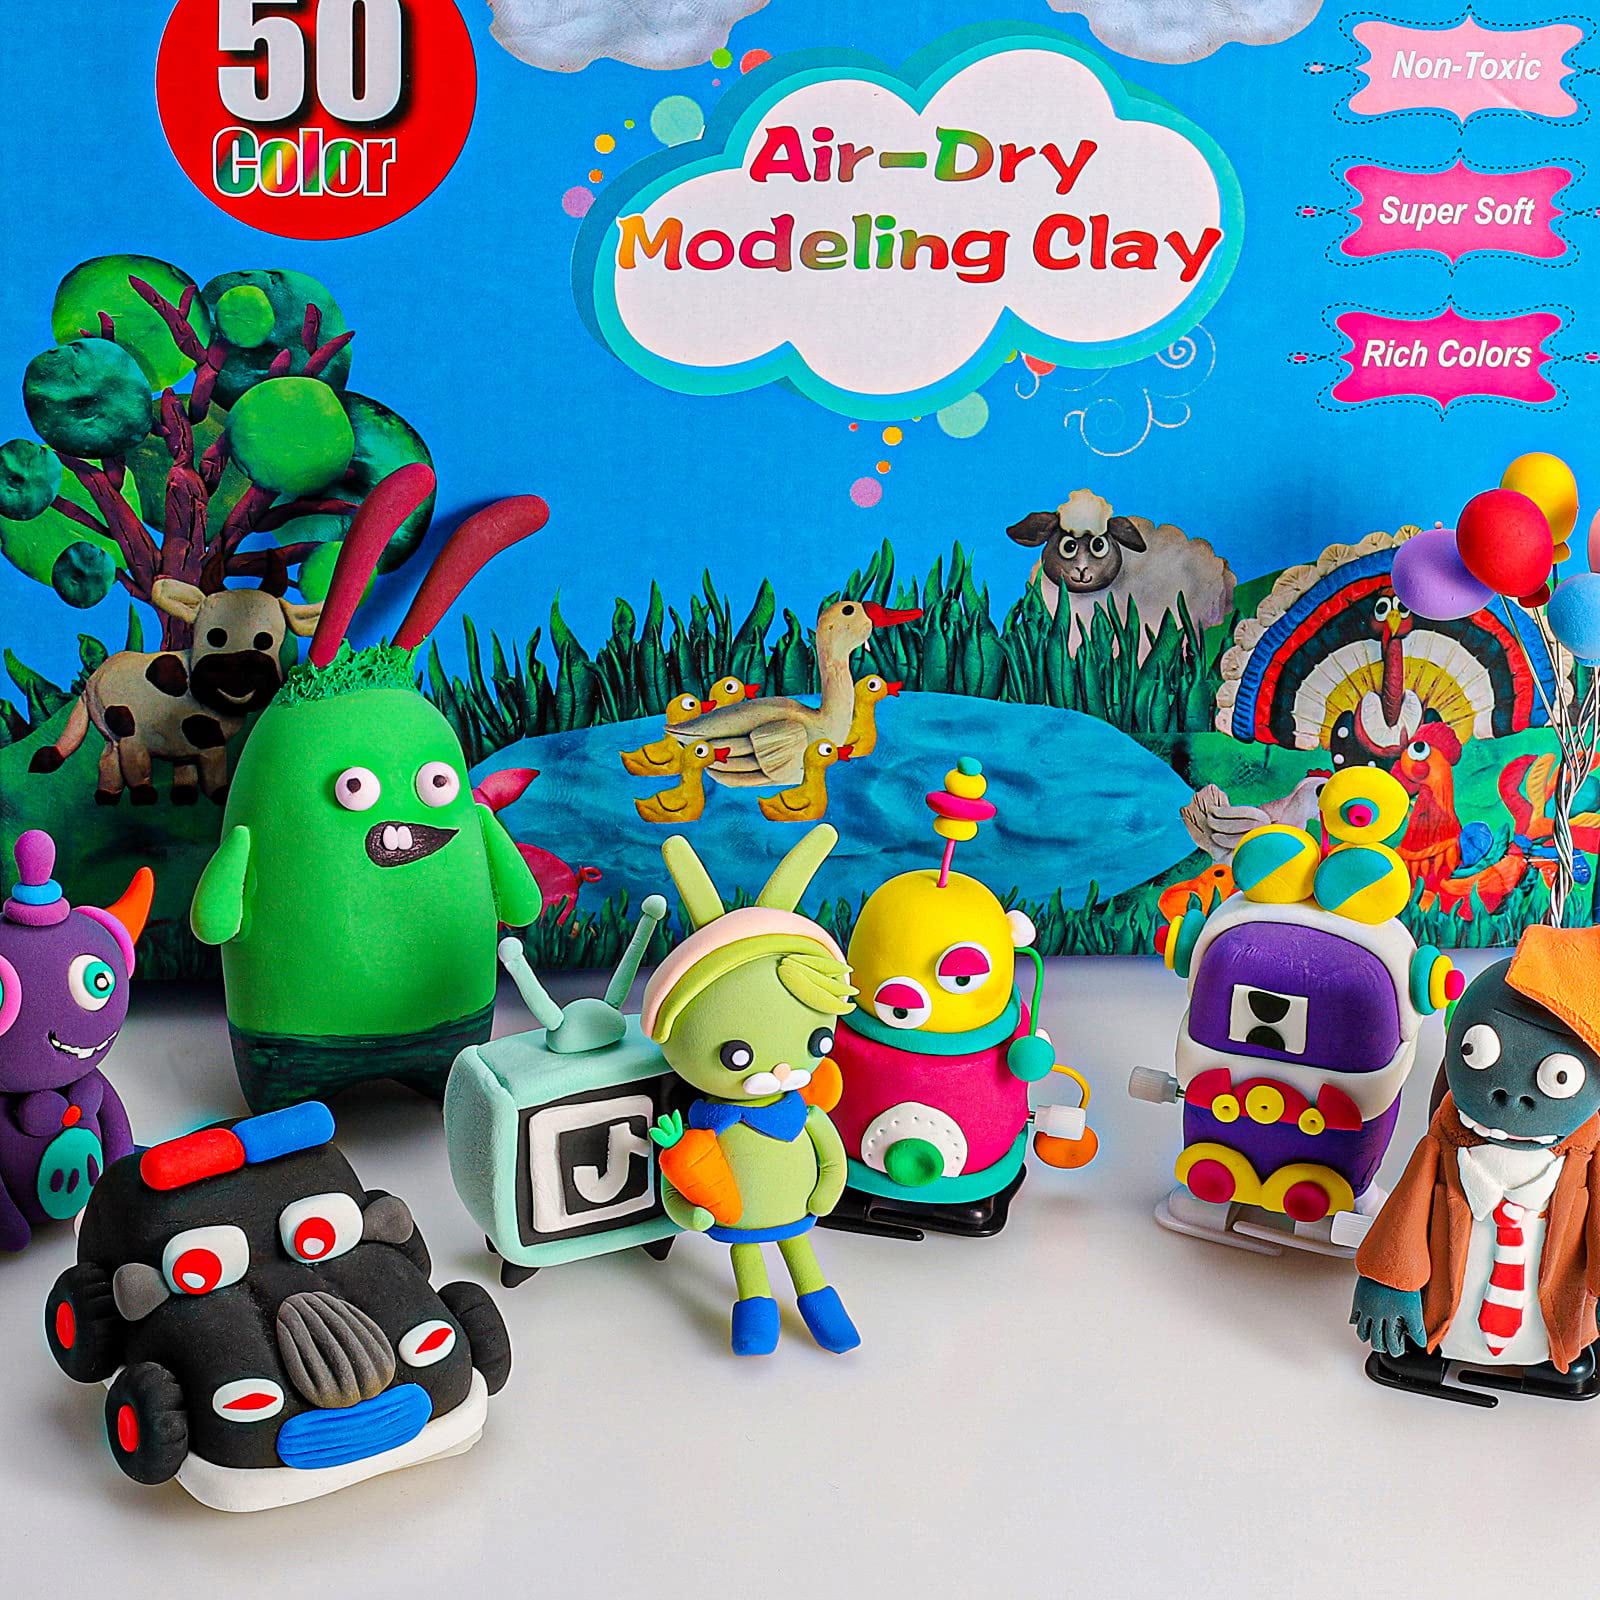 Air Dry Clay for Kids, 50 Colors Air Dry Ultra Light Clay, Modeling Clay for Kids with Play Mat & 3 Sculpting Tools, Clay Non Toxic, Soft & Safe 